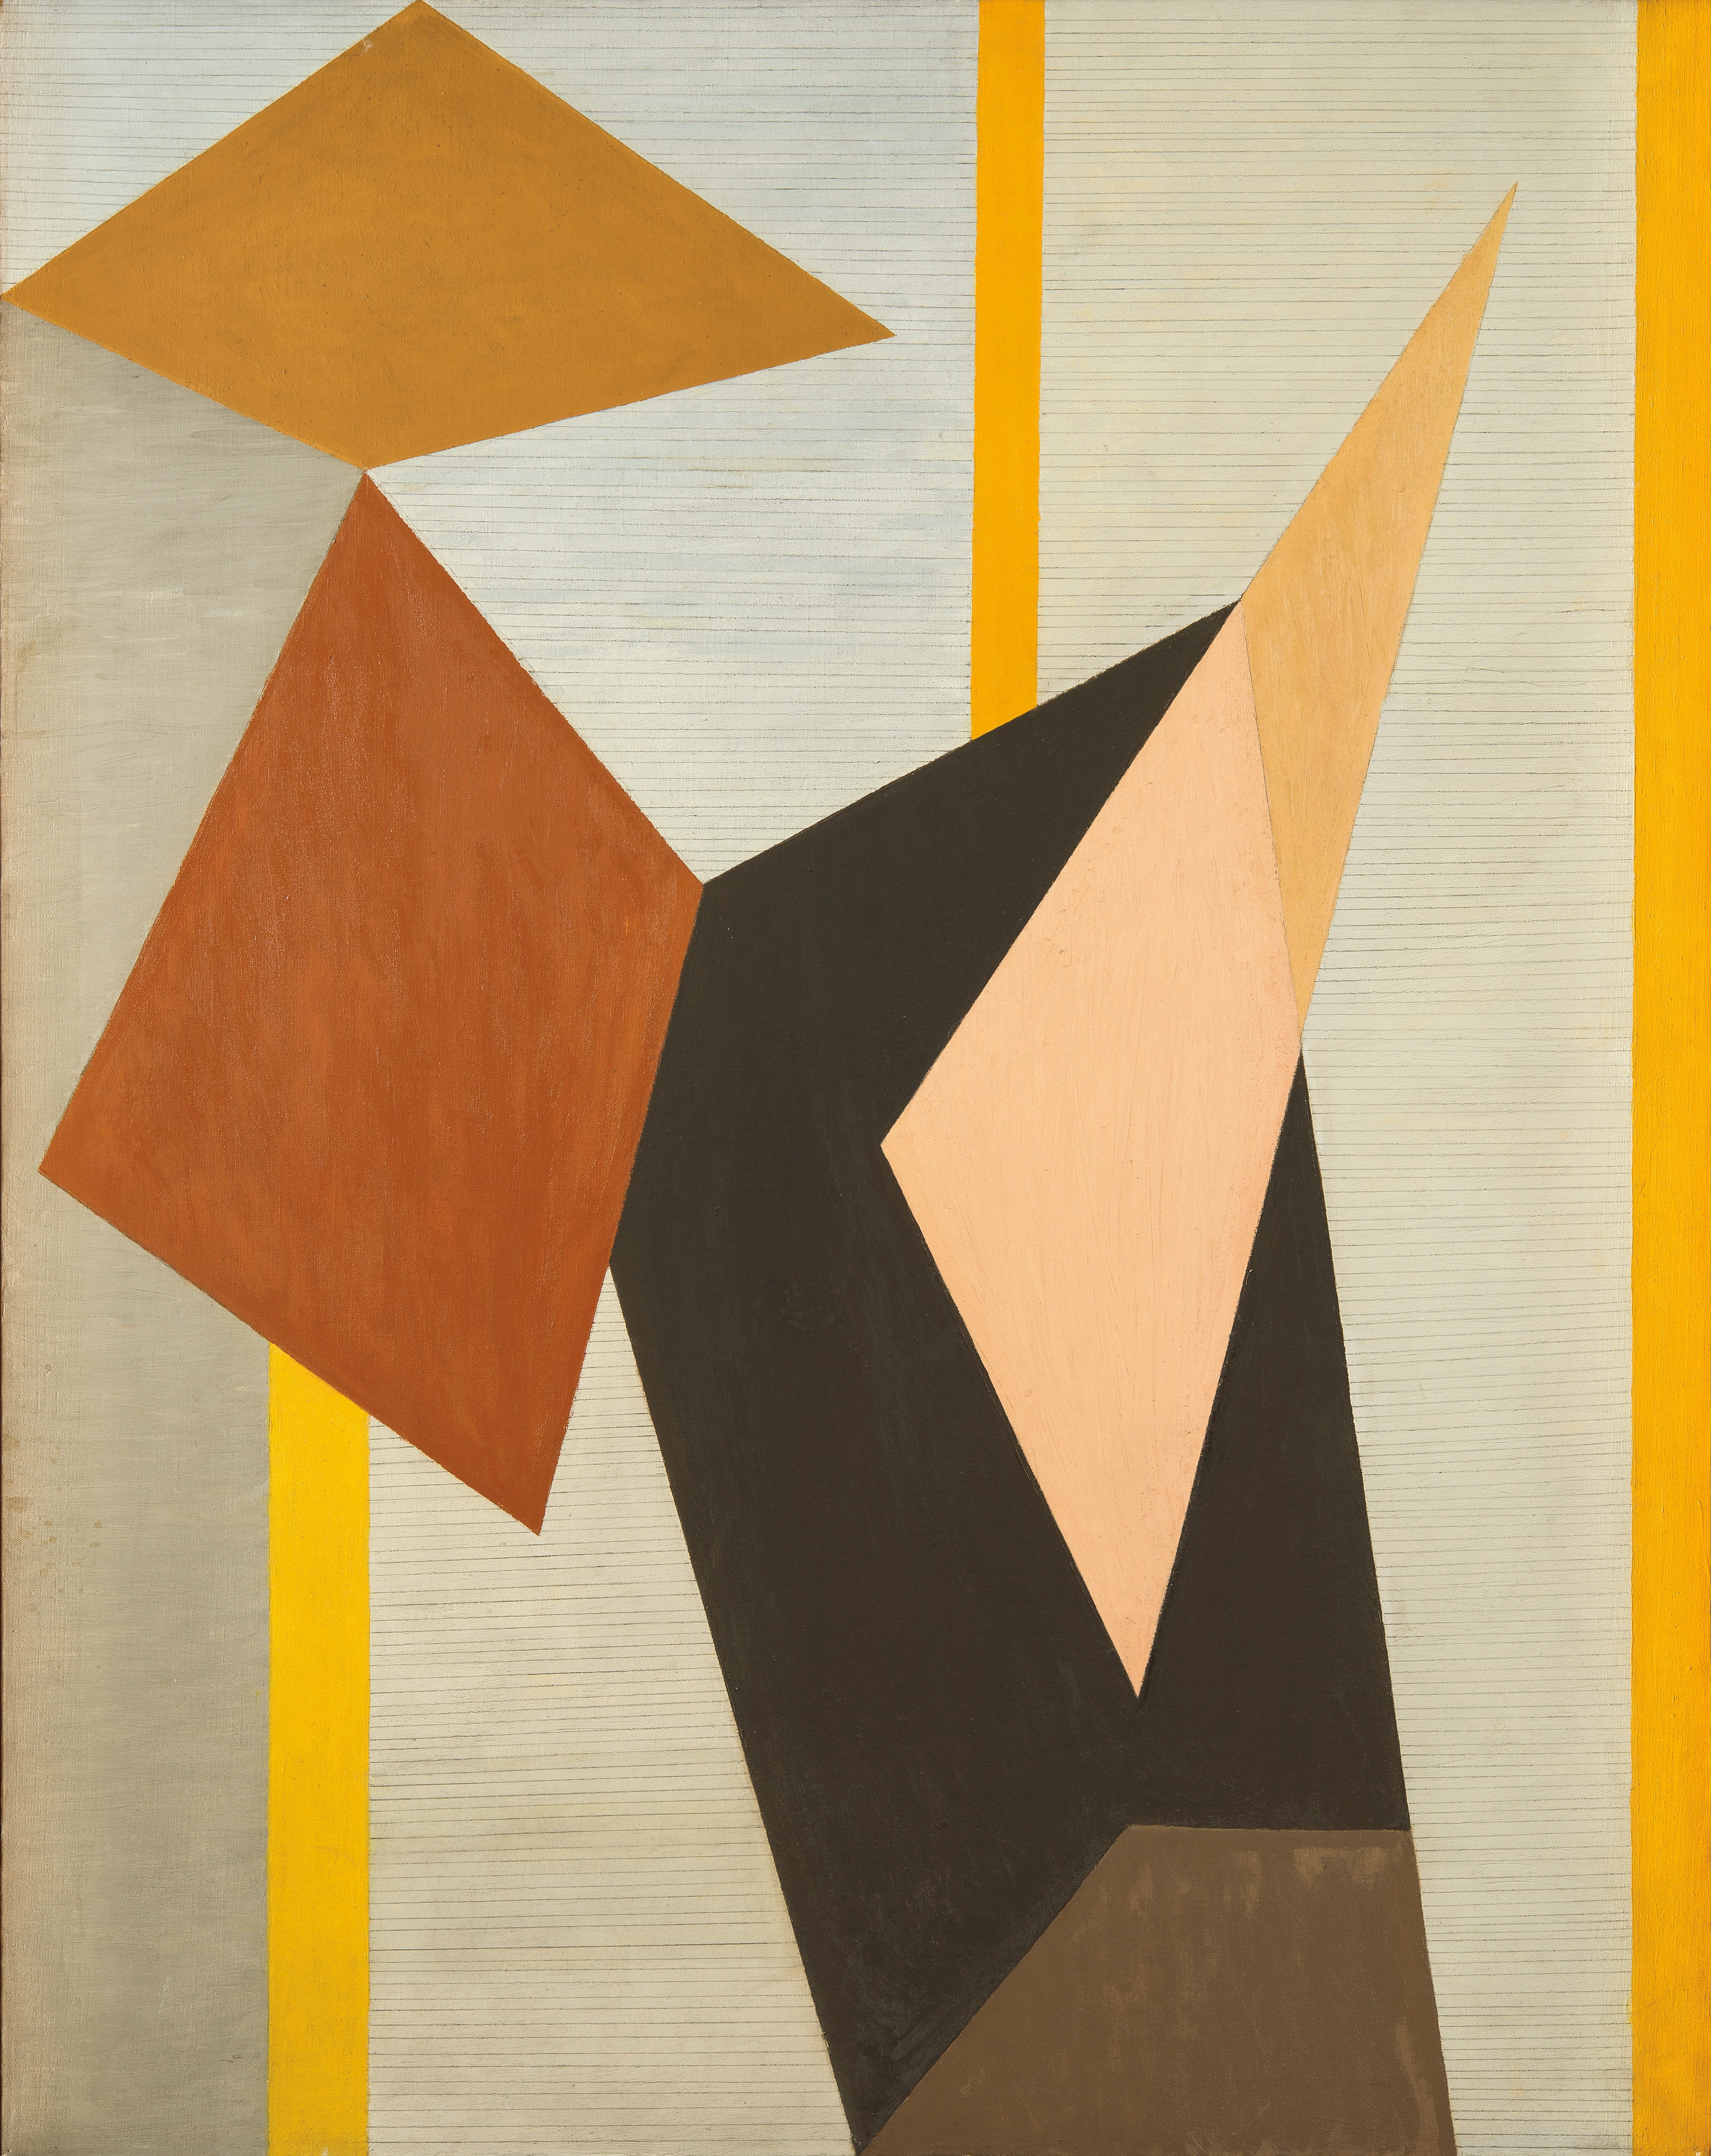 Abstract oil painting comprised of a pink, orange, orange-red, black, and brown triangles and parallelograms. The background of these shapes is grey-beige, with three orange vertical stripes spaced widely apart.